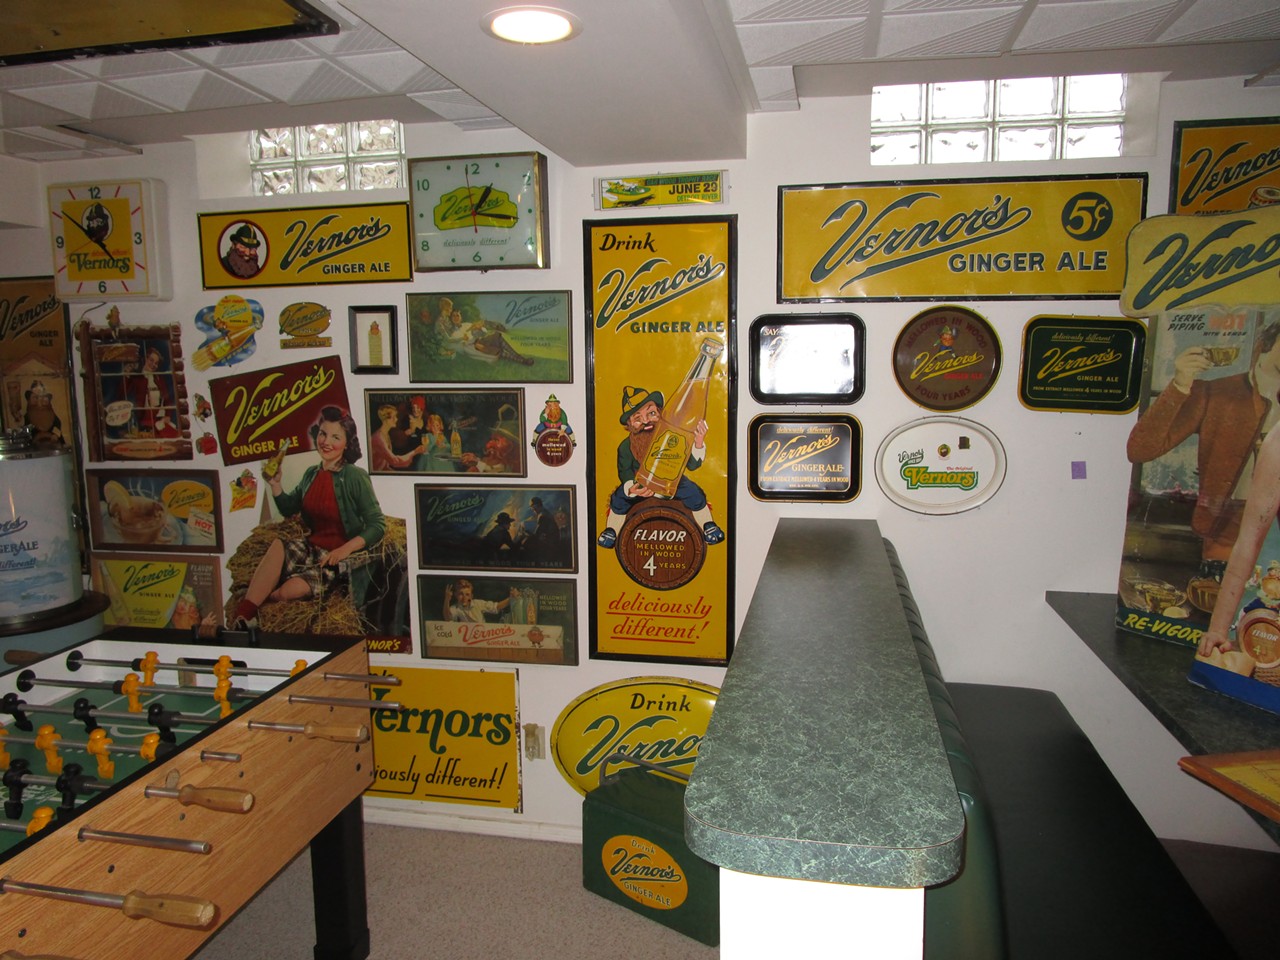 Wunderlich says of his massive collection, "This is a decent representation of the ages of Vernor's, but in no way represents everything that Vernor's ever produced, because they produce a lot of stuff. It&#146;s amazing how much they produced."